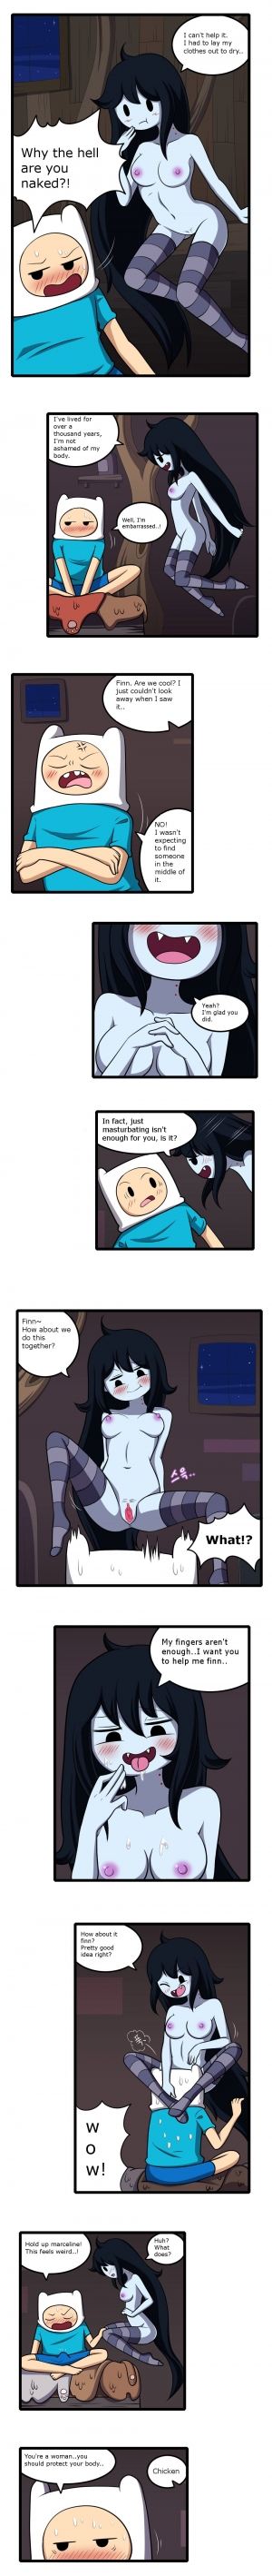 [WB] Adult Time 4 (Adventure Time) (English) [incomplete] - Page 5